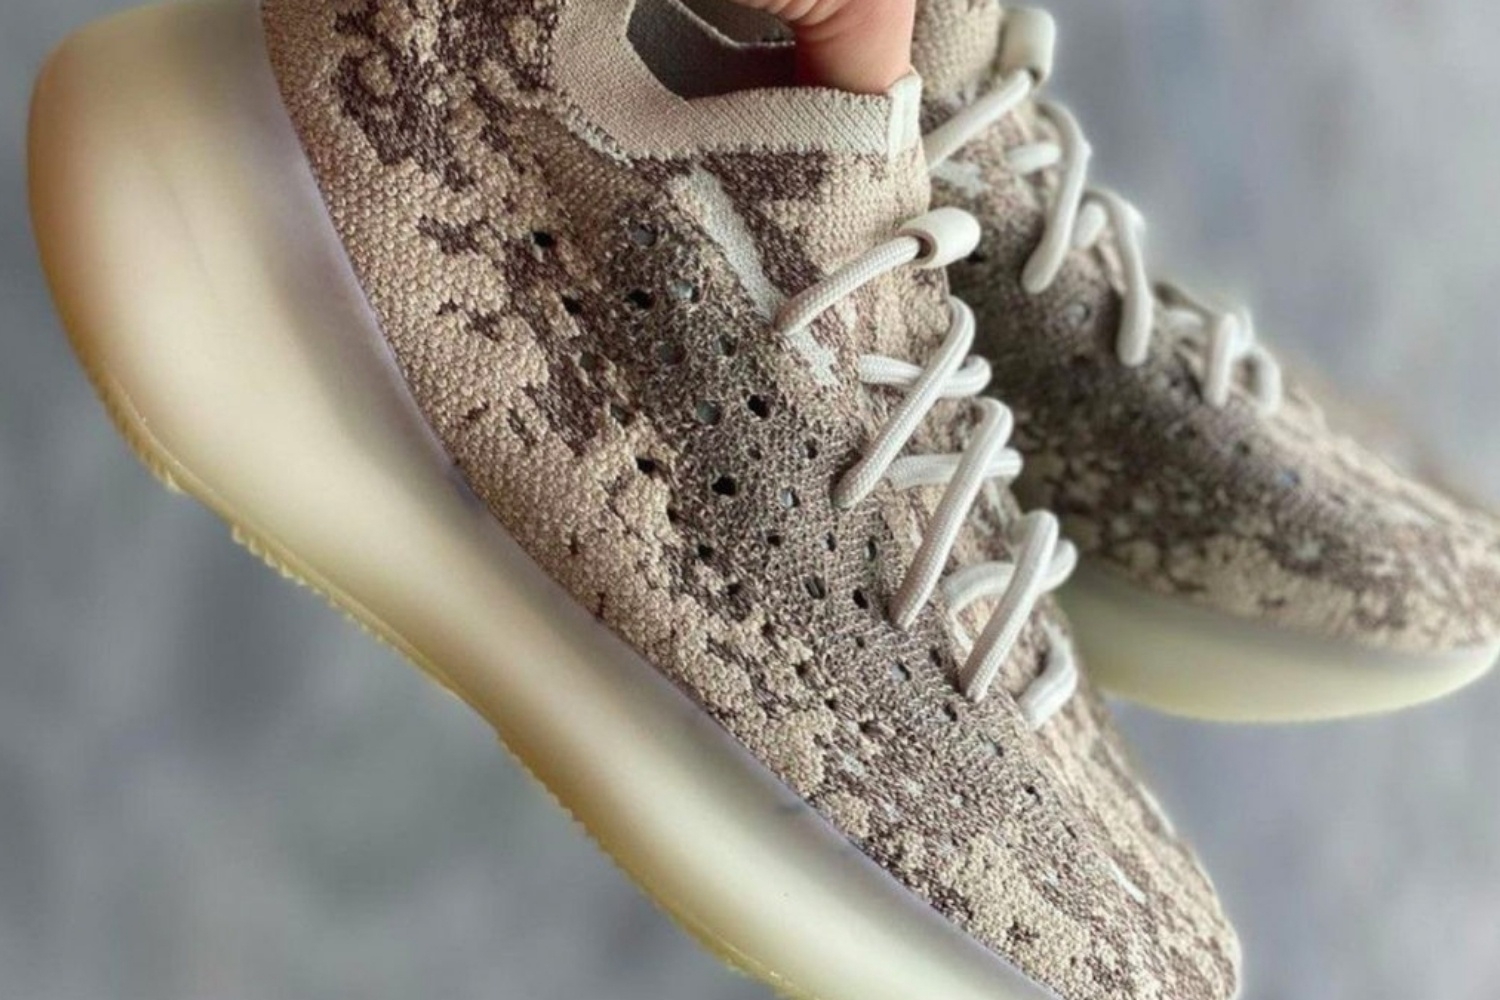 adidas Yeezy Boost 380 comes with 'Pyrite' colorway